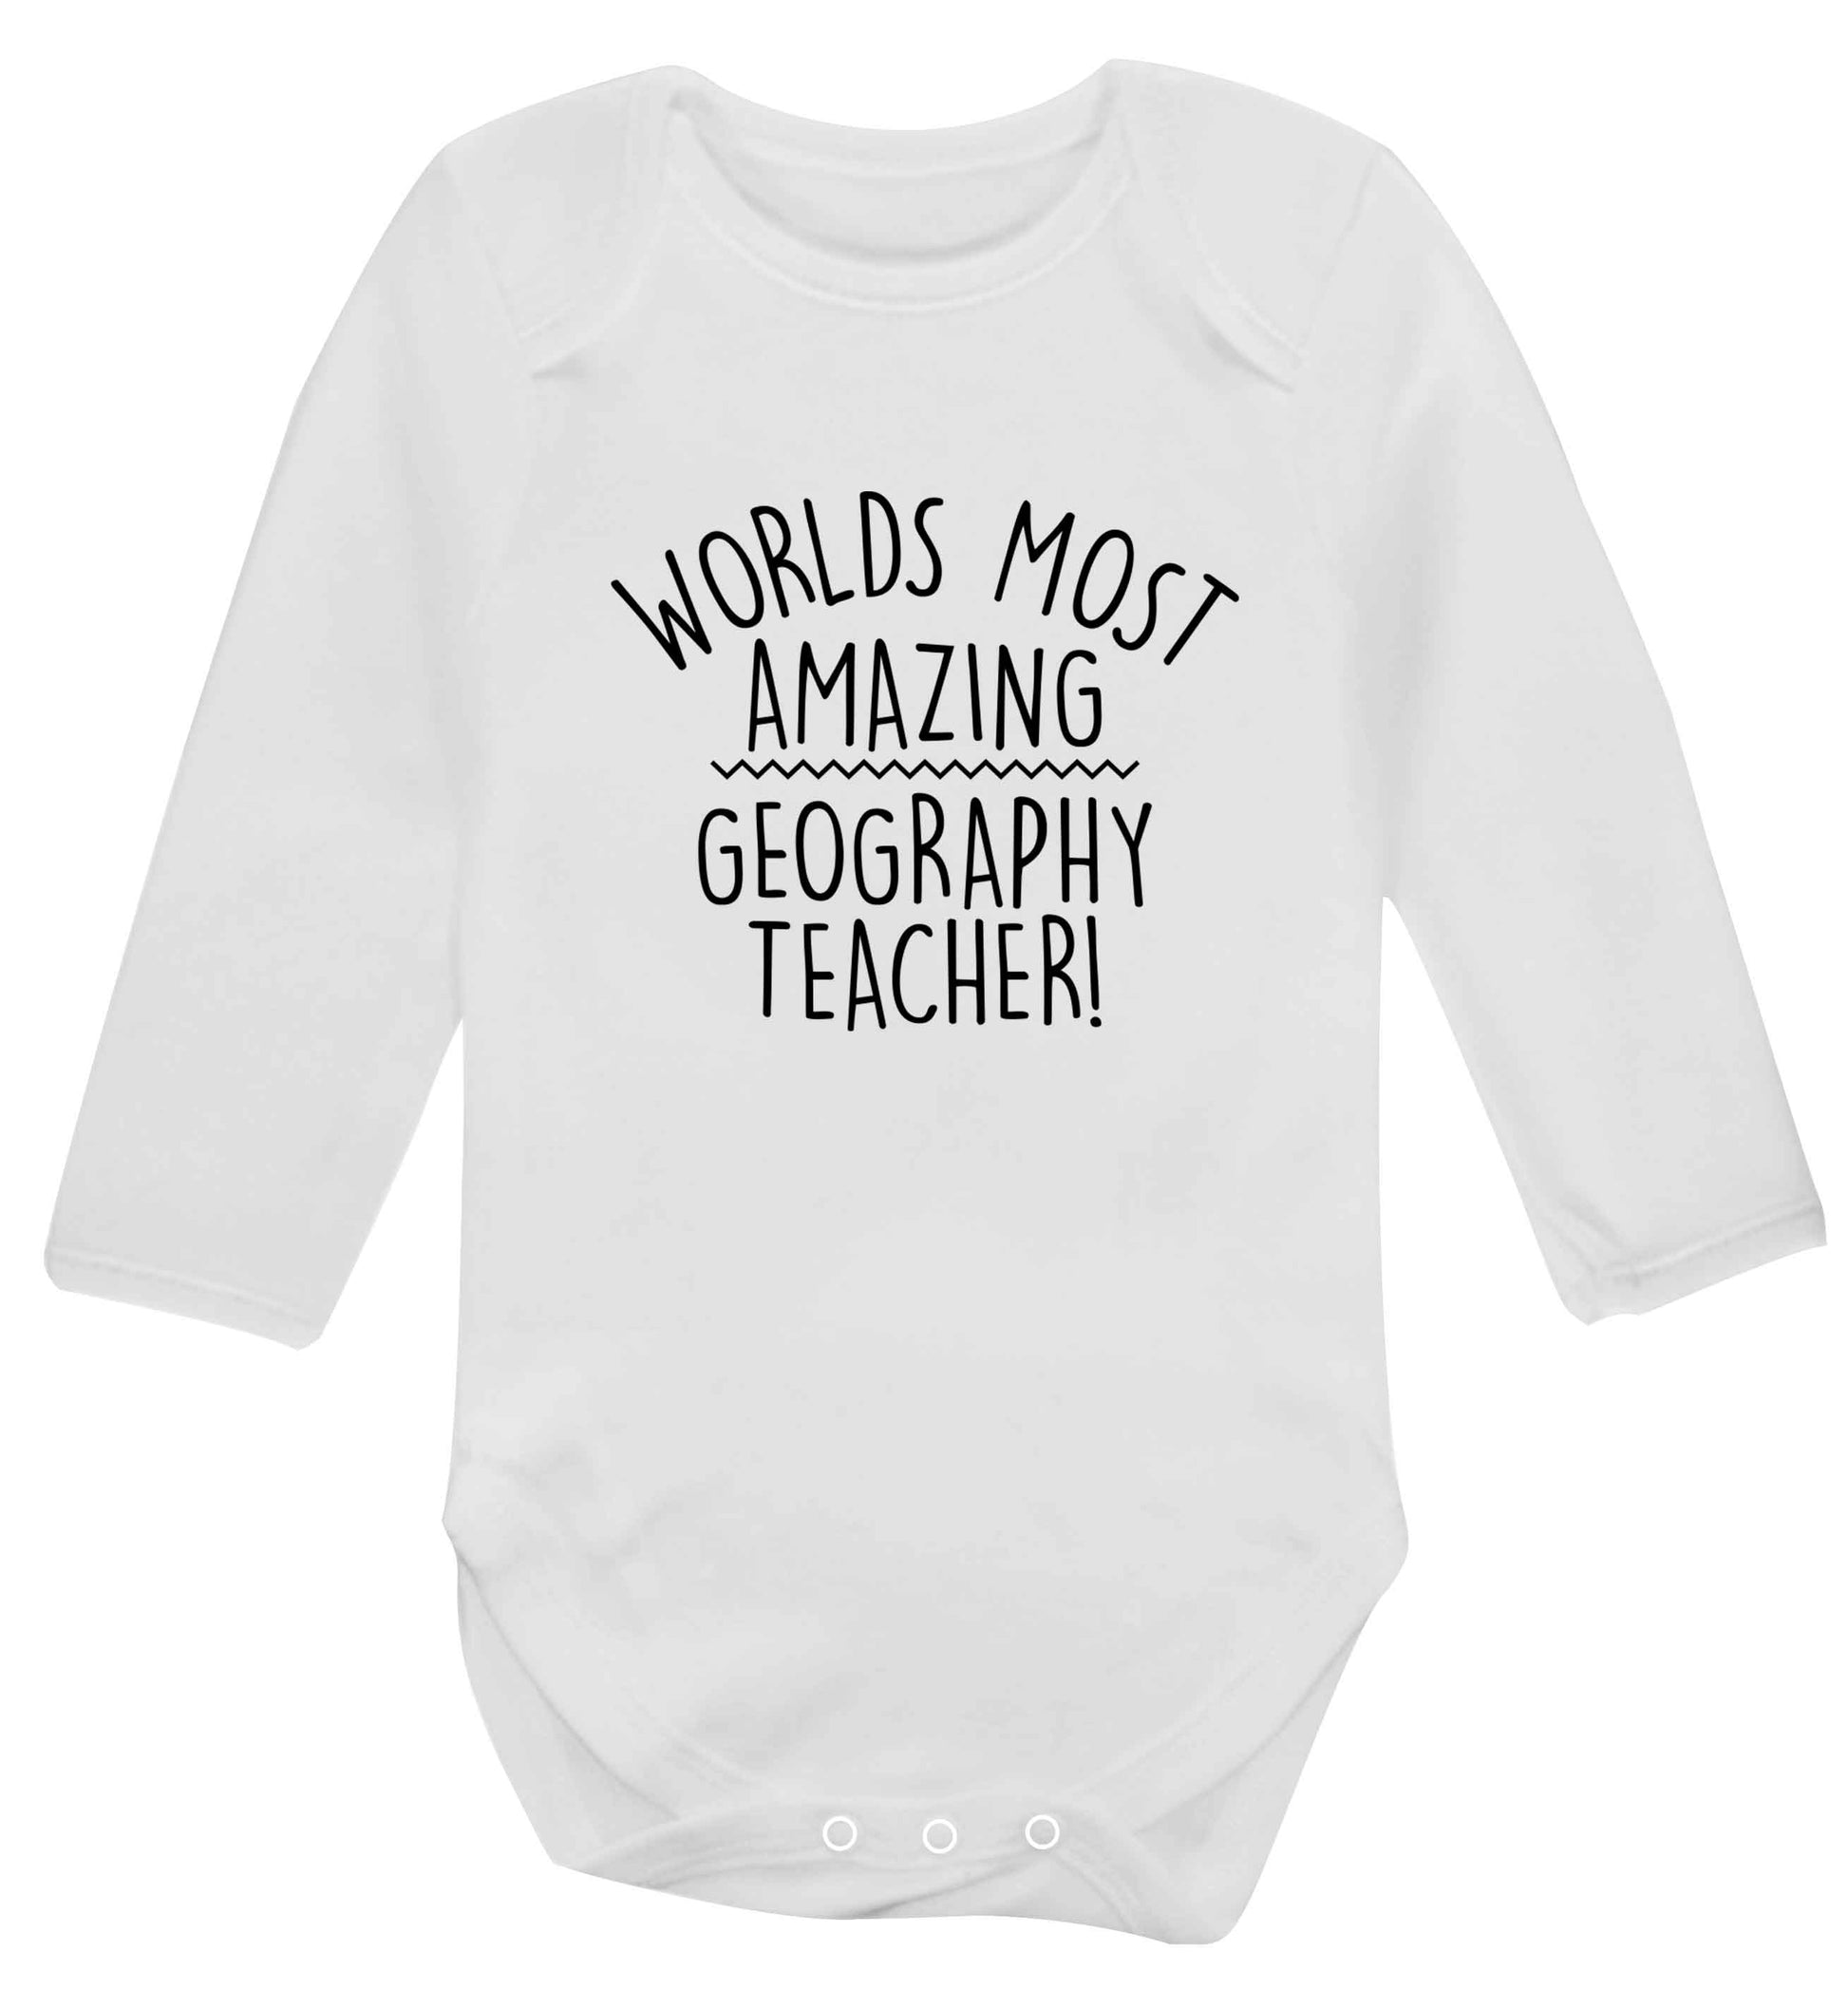 Worlds most amazing geography teacher baby vest long sleeved white 6-12 months